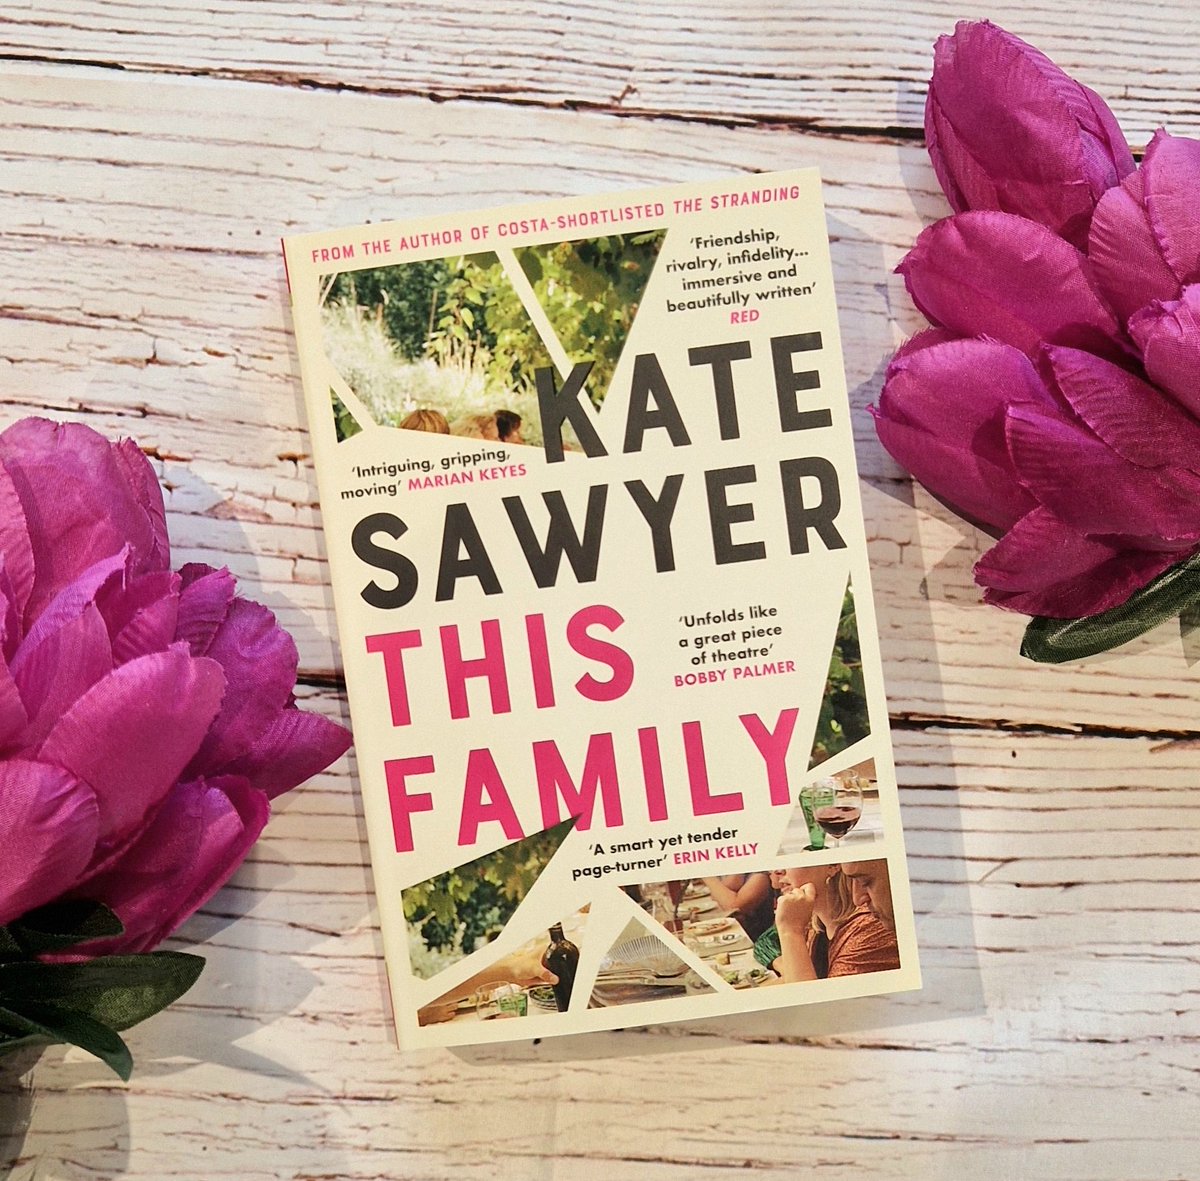 Fiction BOTM 🌸💍💒🌸 A lyrical, exquisitely constructed exploration of the complex bonds of family set across one summer's day, full of love and betrayal, hope and joy, heartbreak, and grief. Perfect for fans of Maggie O'Farrell, Tom Lake, and Lucinda Riley.